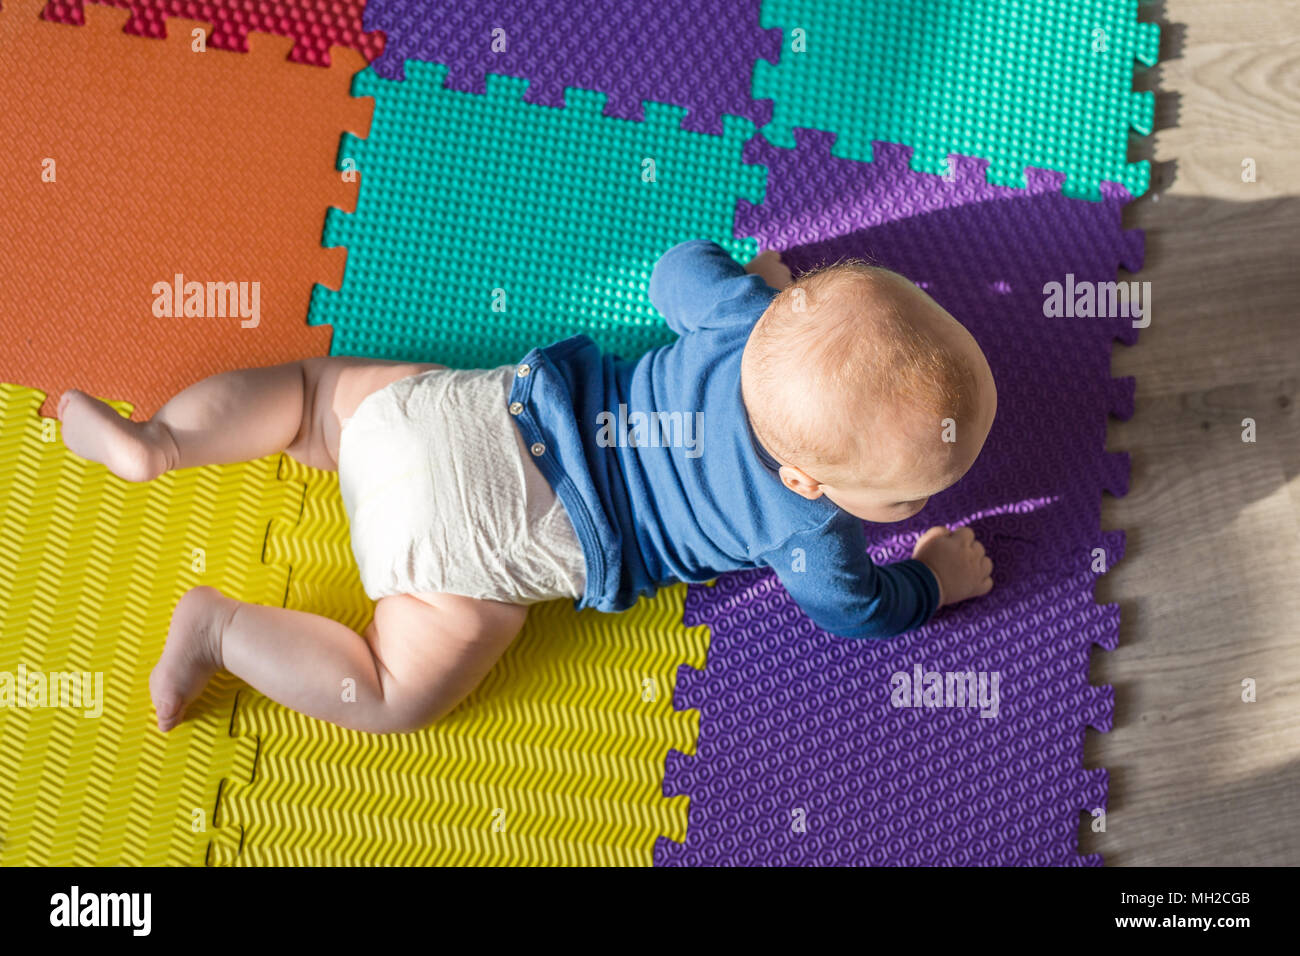 Infant baby boy playing on colorful soft mat. Little child making first  crawling steps on floor. Top view from above Stock Photo - Alamy